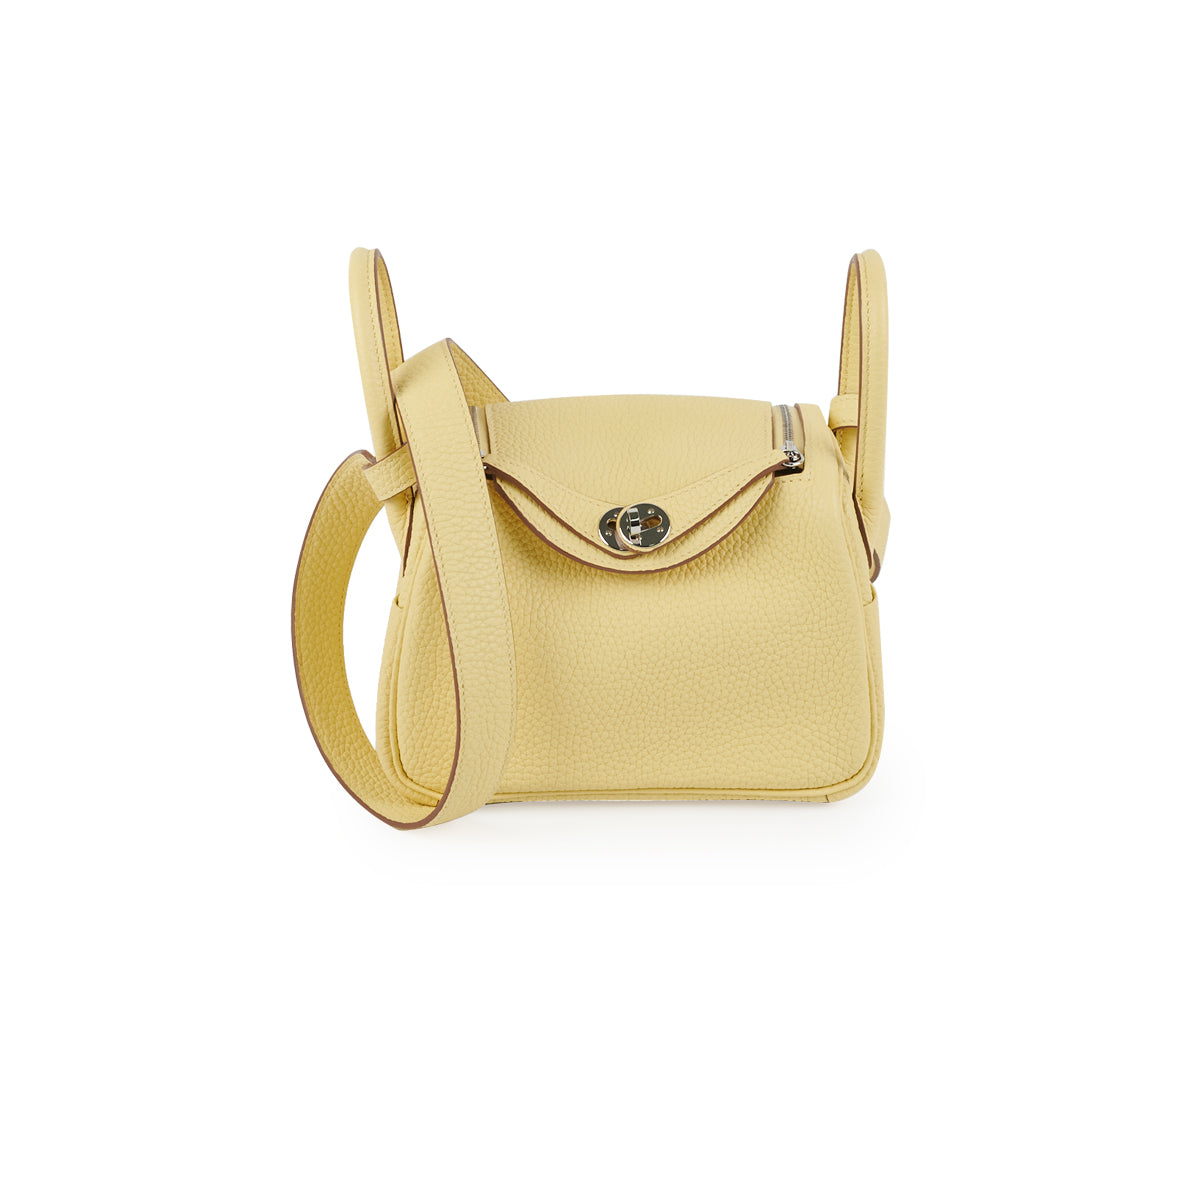 HERMÈS Mini Lindy shoulder bag in Nata Clemence leather with